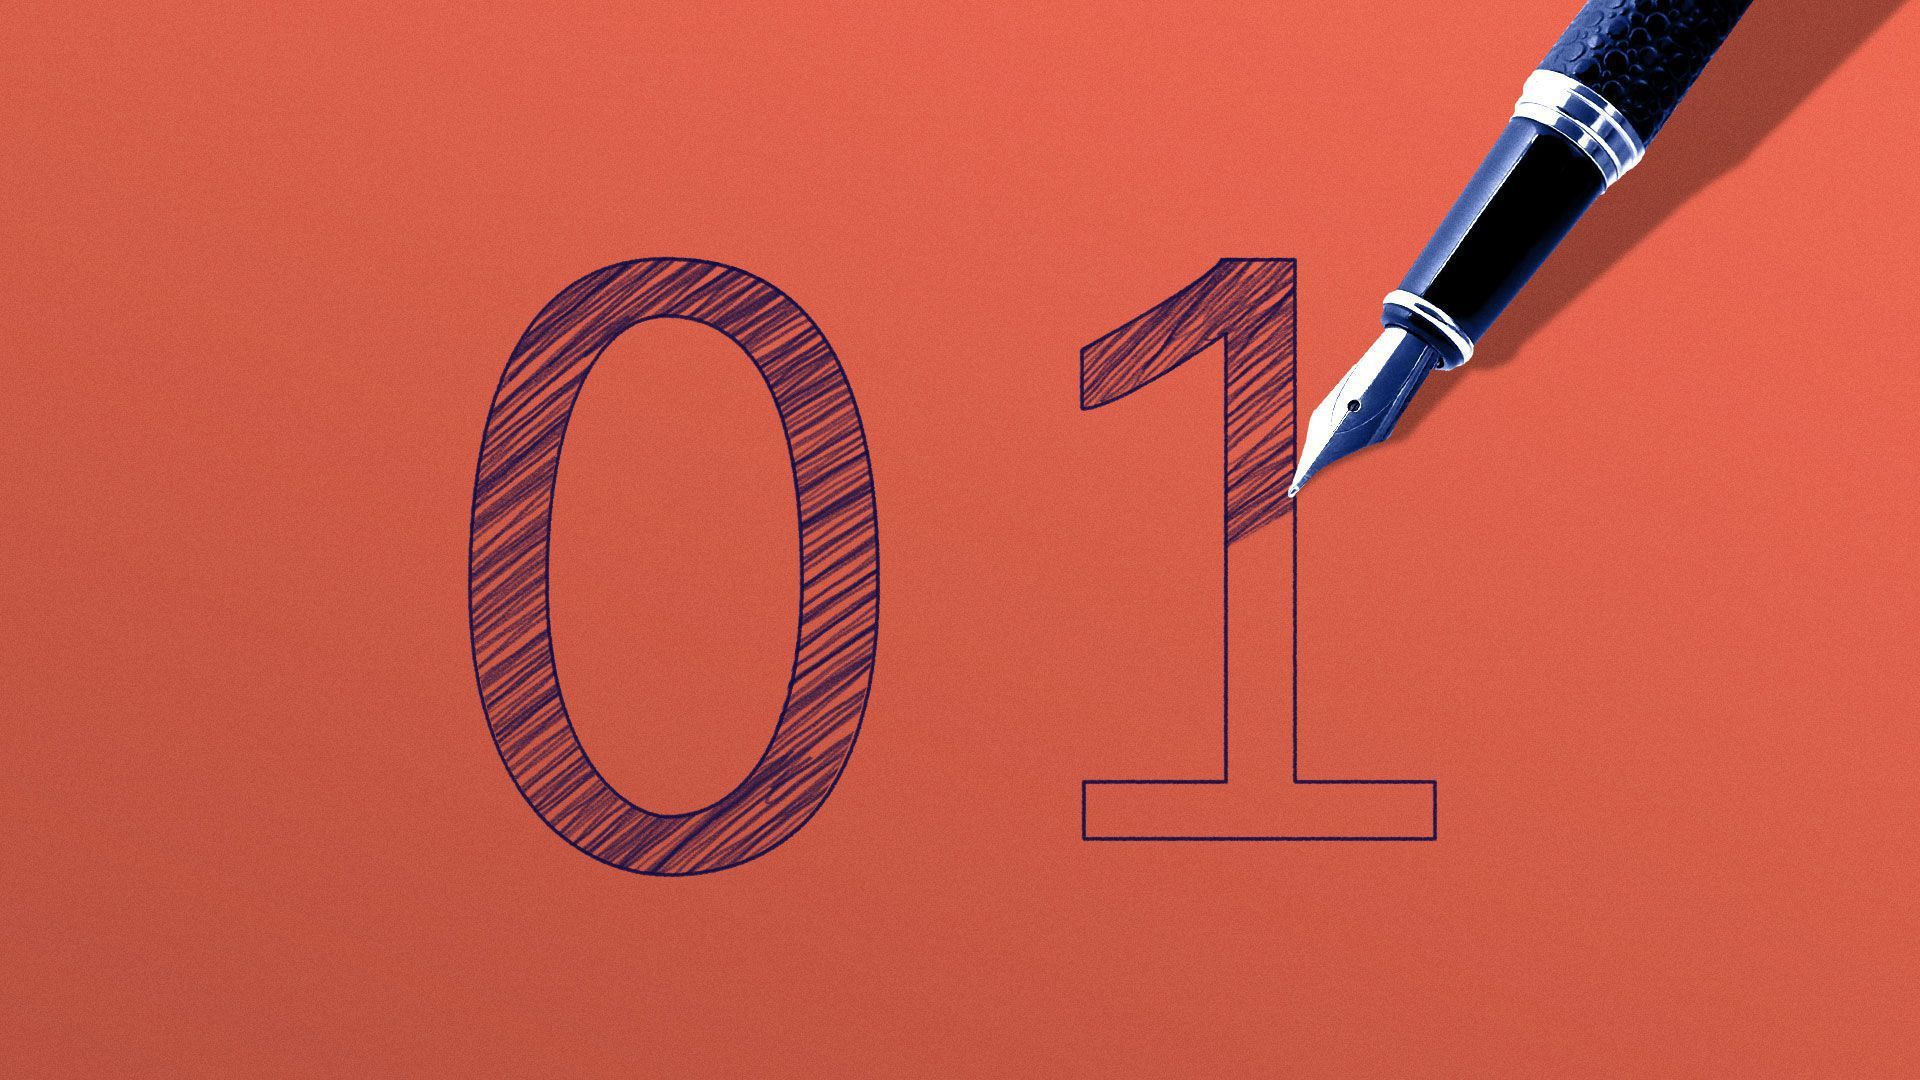 Image of a pen writing "01"